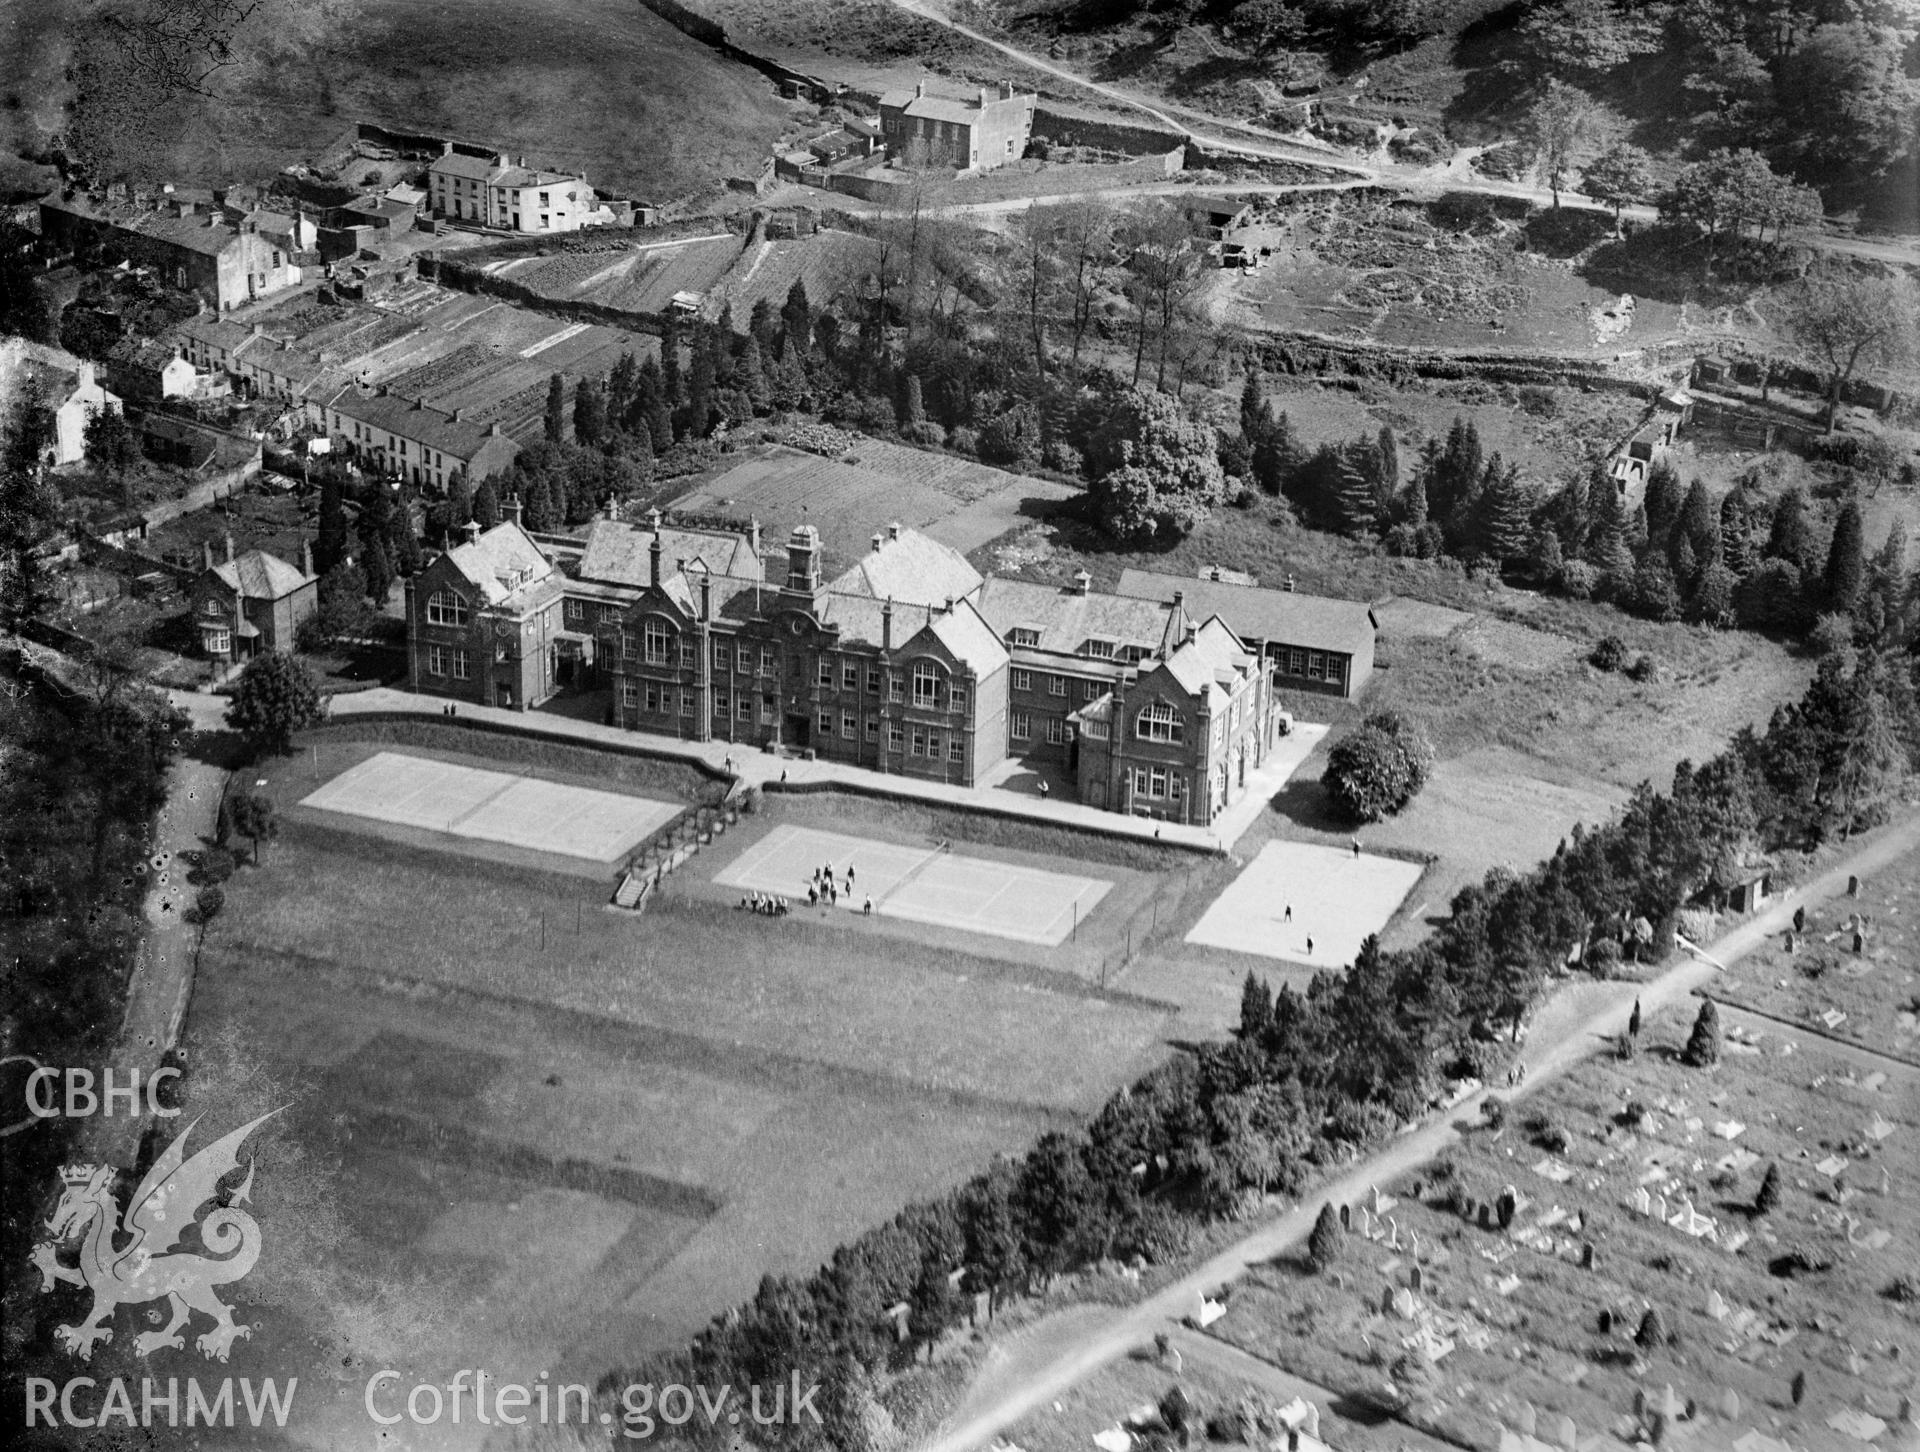 View of Pontypridd Grammar Schhol for Girls, oblique aerial view. 5?x4? black and white glass plate negative.